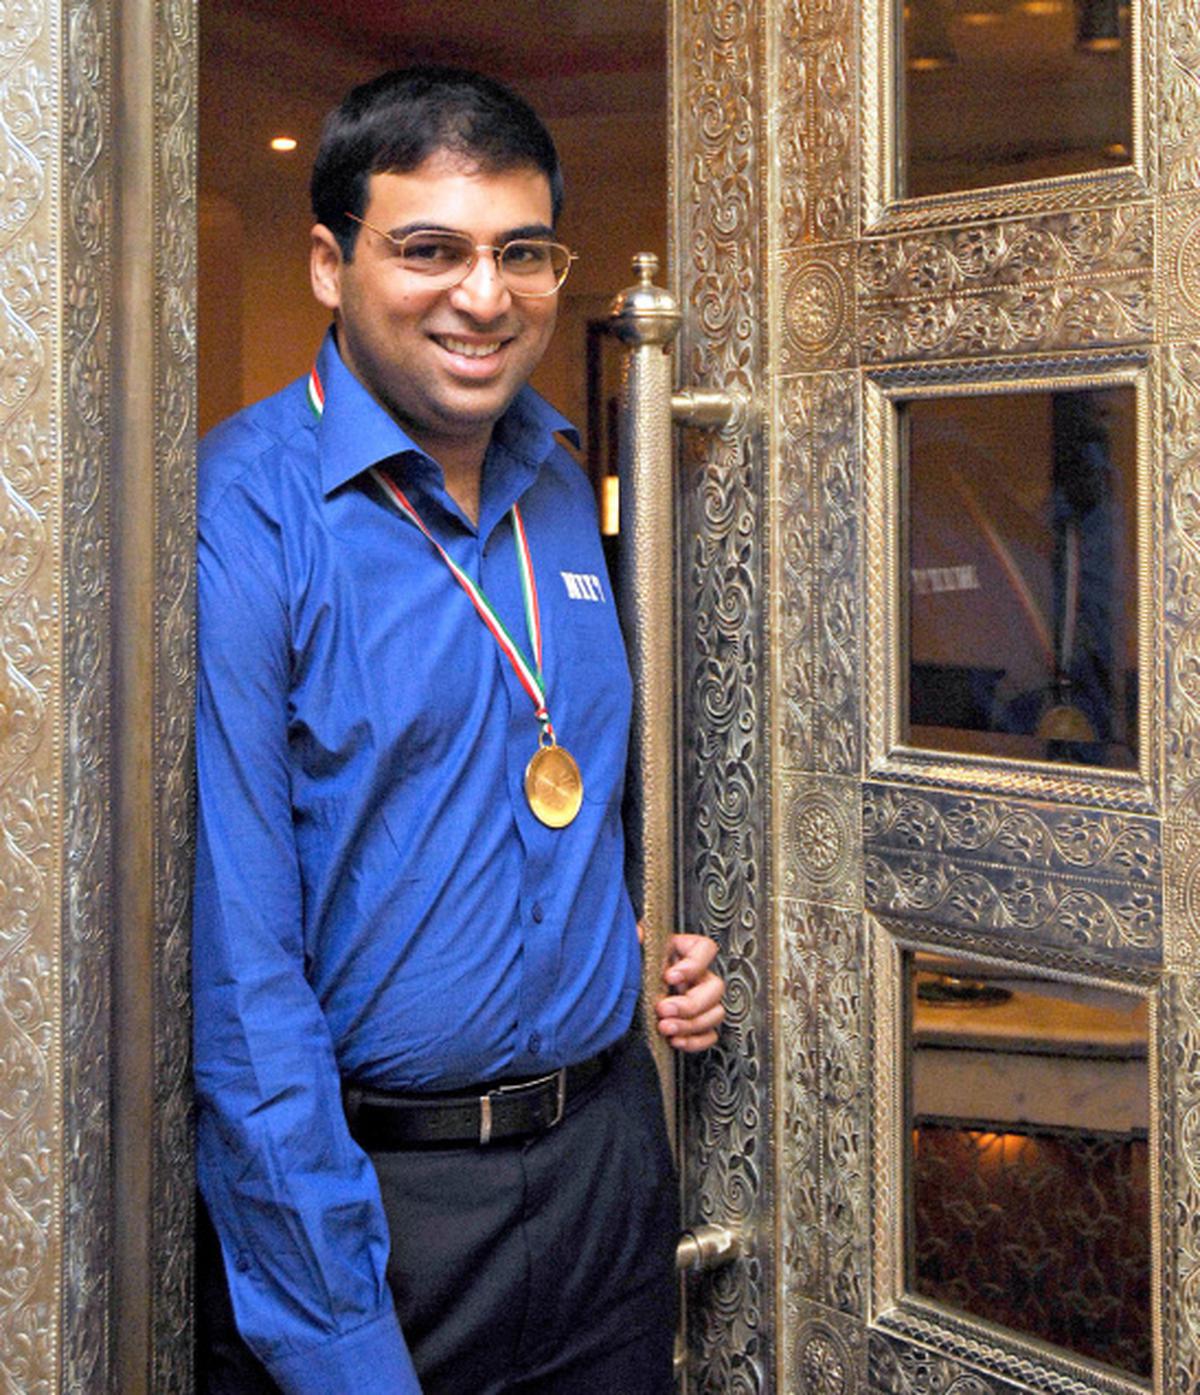 ▷ Viswanathan Anand, Latest Top 10 in the World!